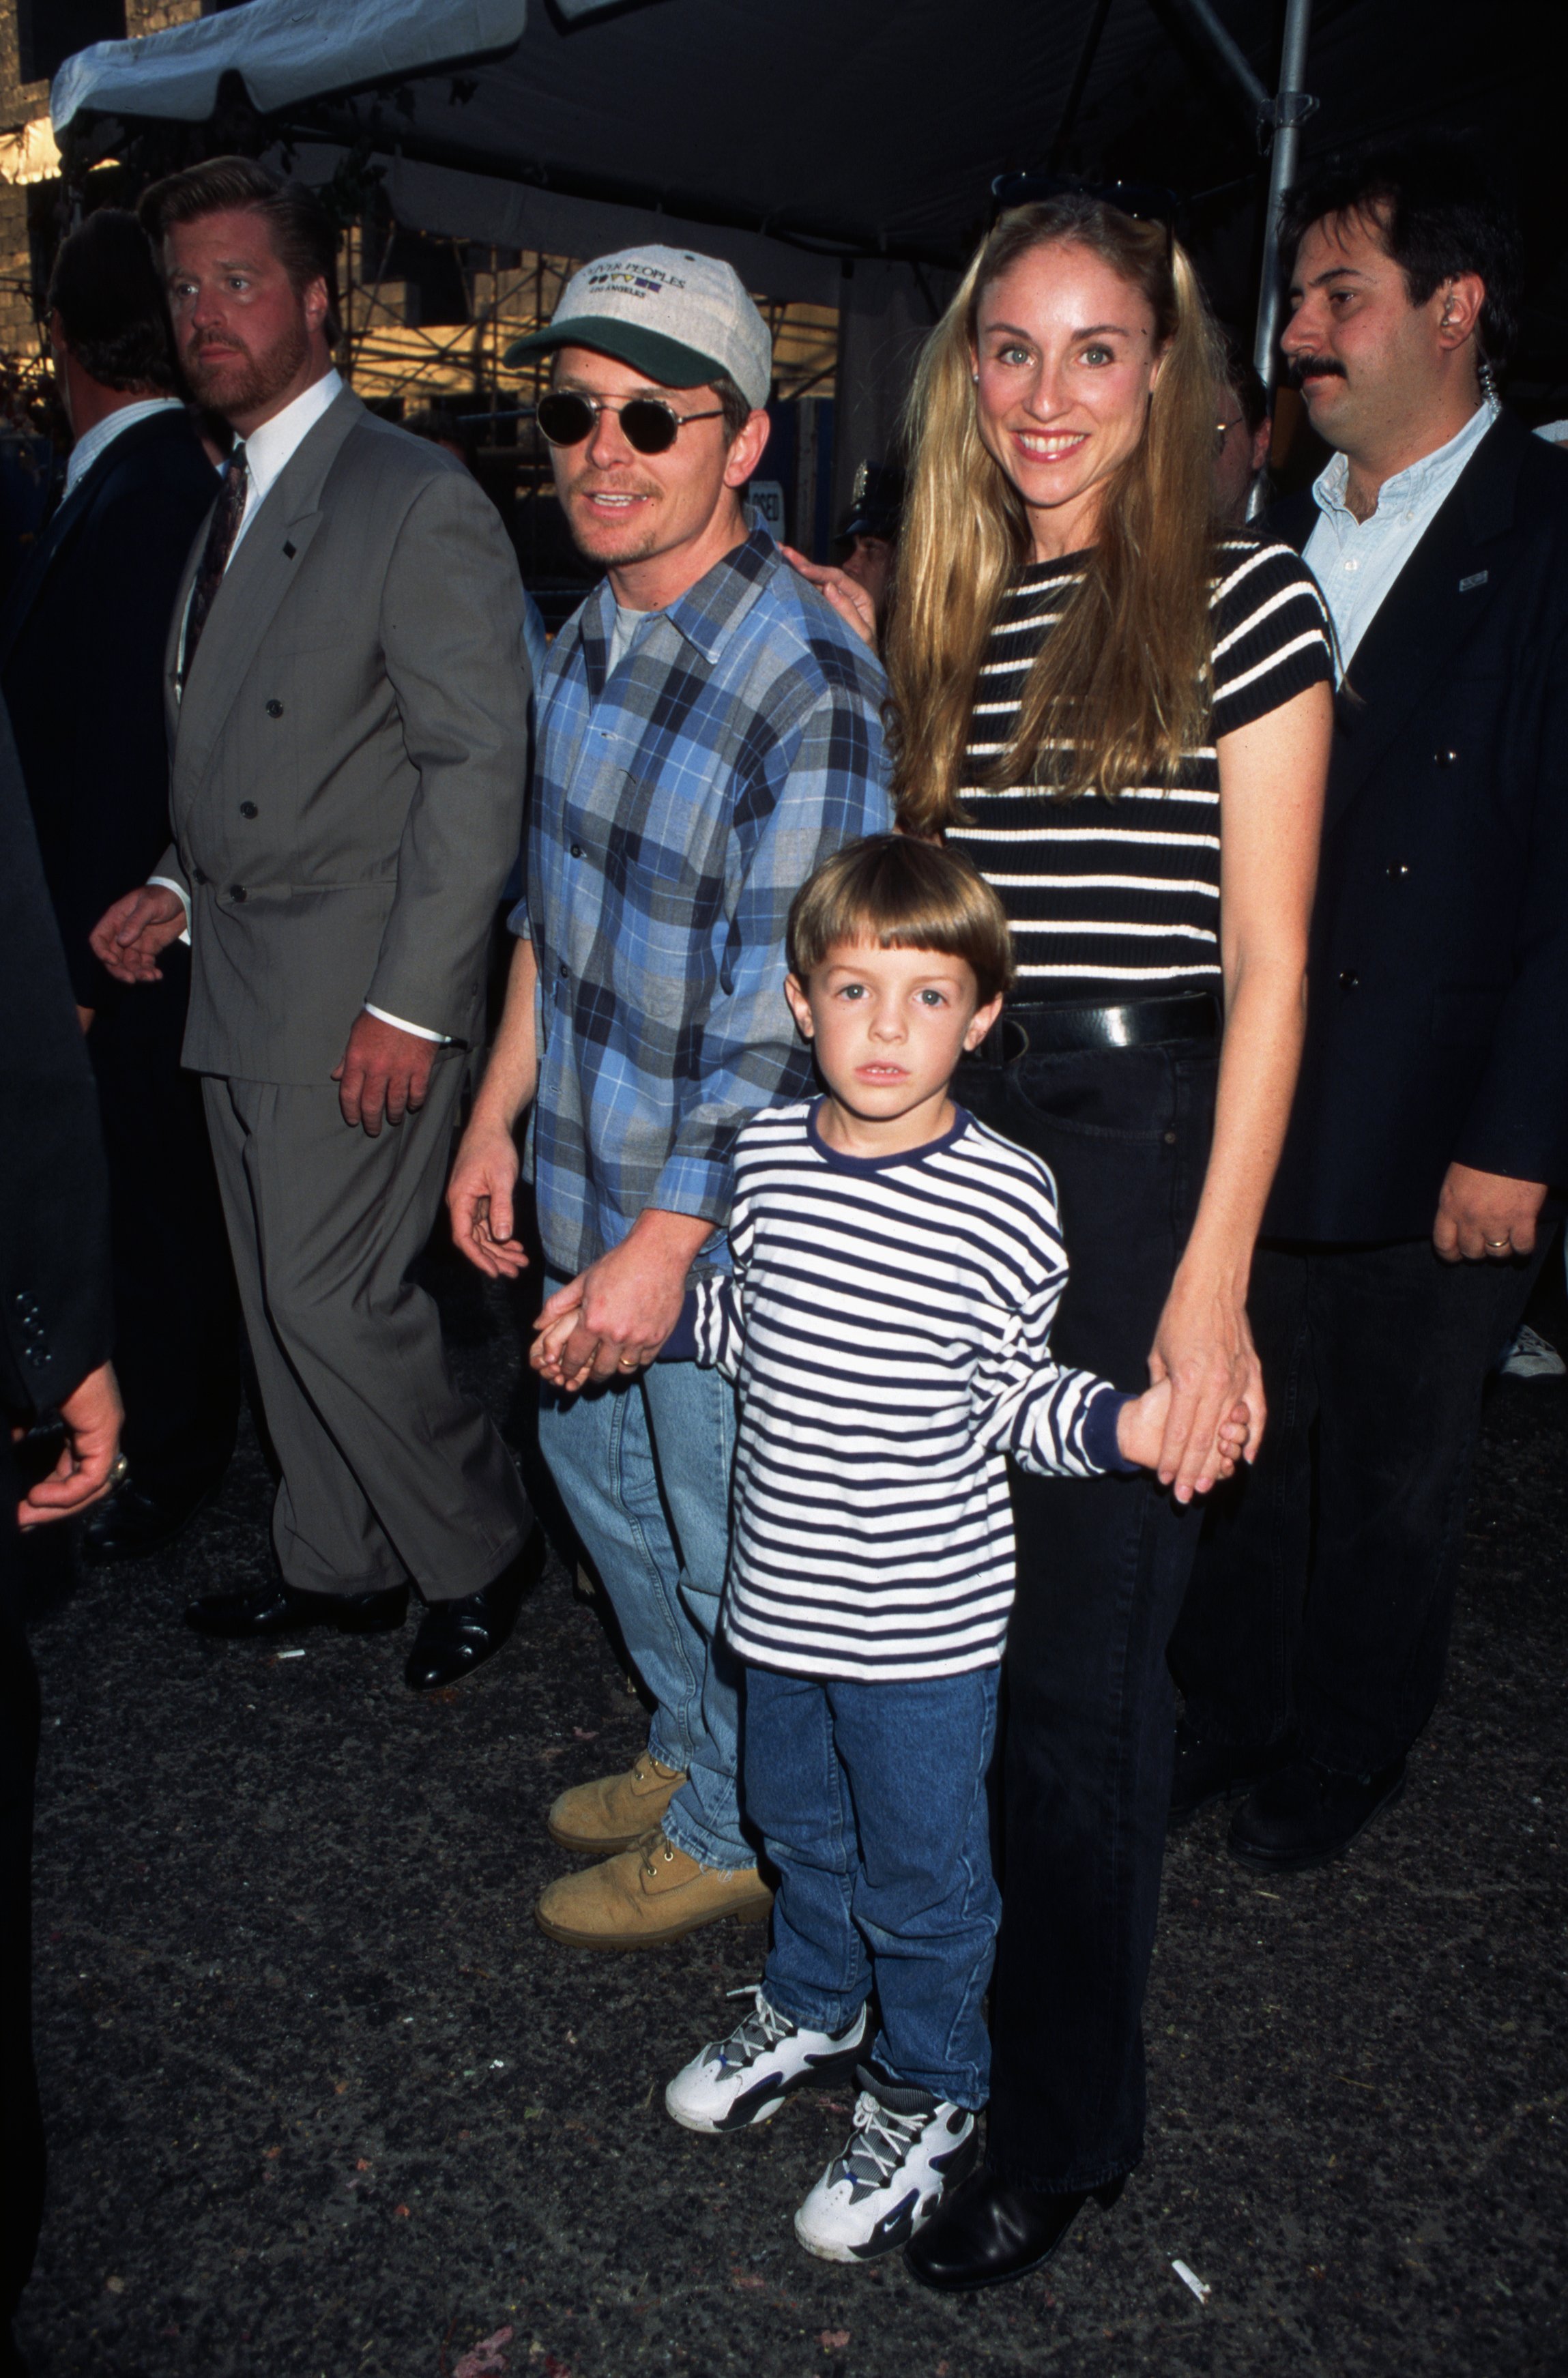 Michael J. Fox with Tracy Pollan and their his son, Sam, at the Kids for Kids benefit in 1995 in New York. / Source: Getty Images